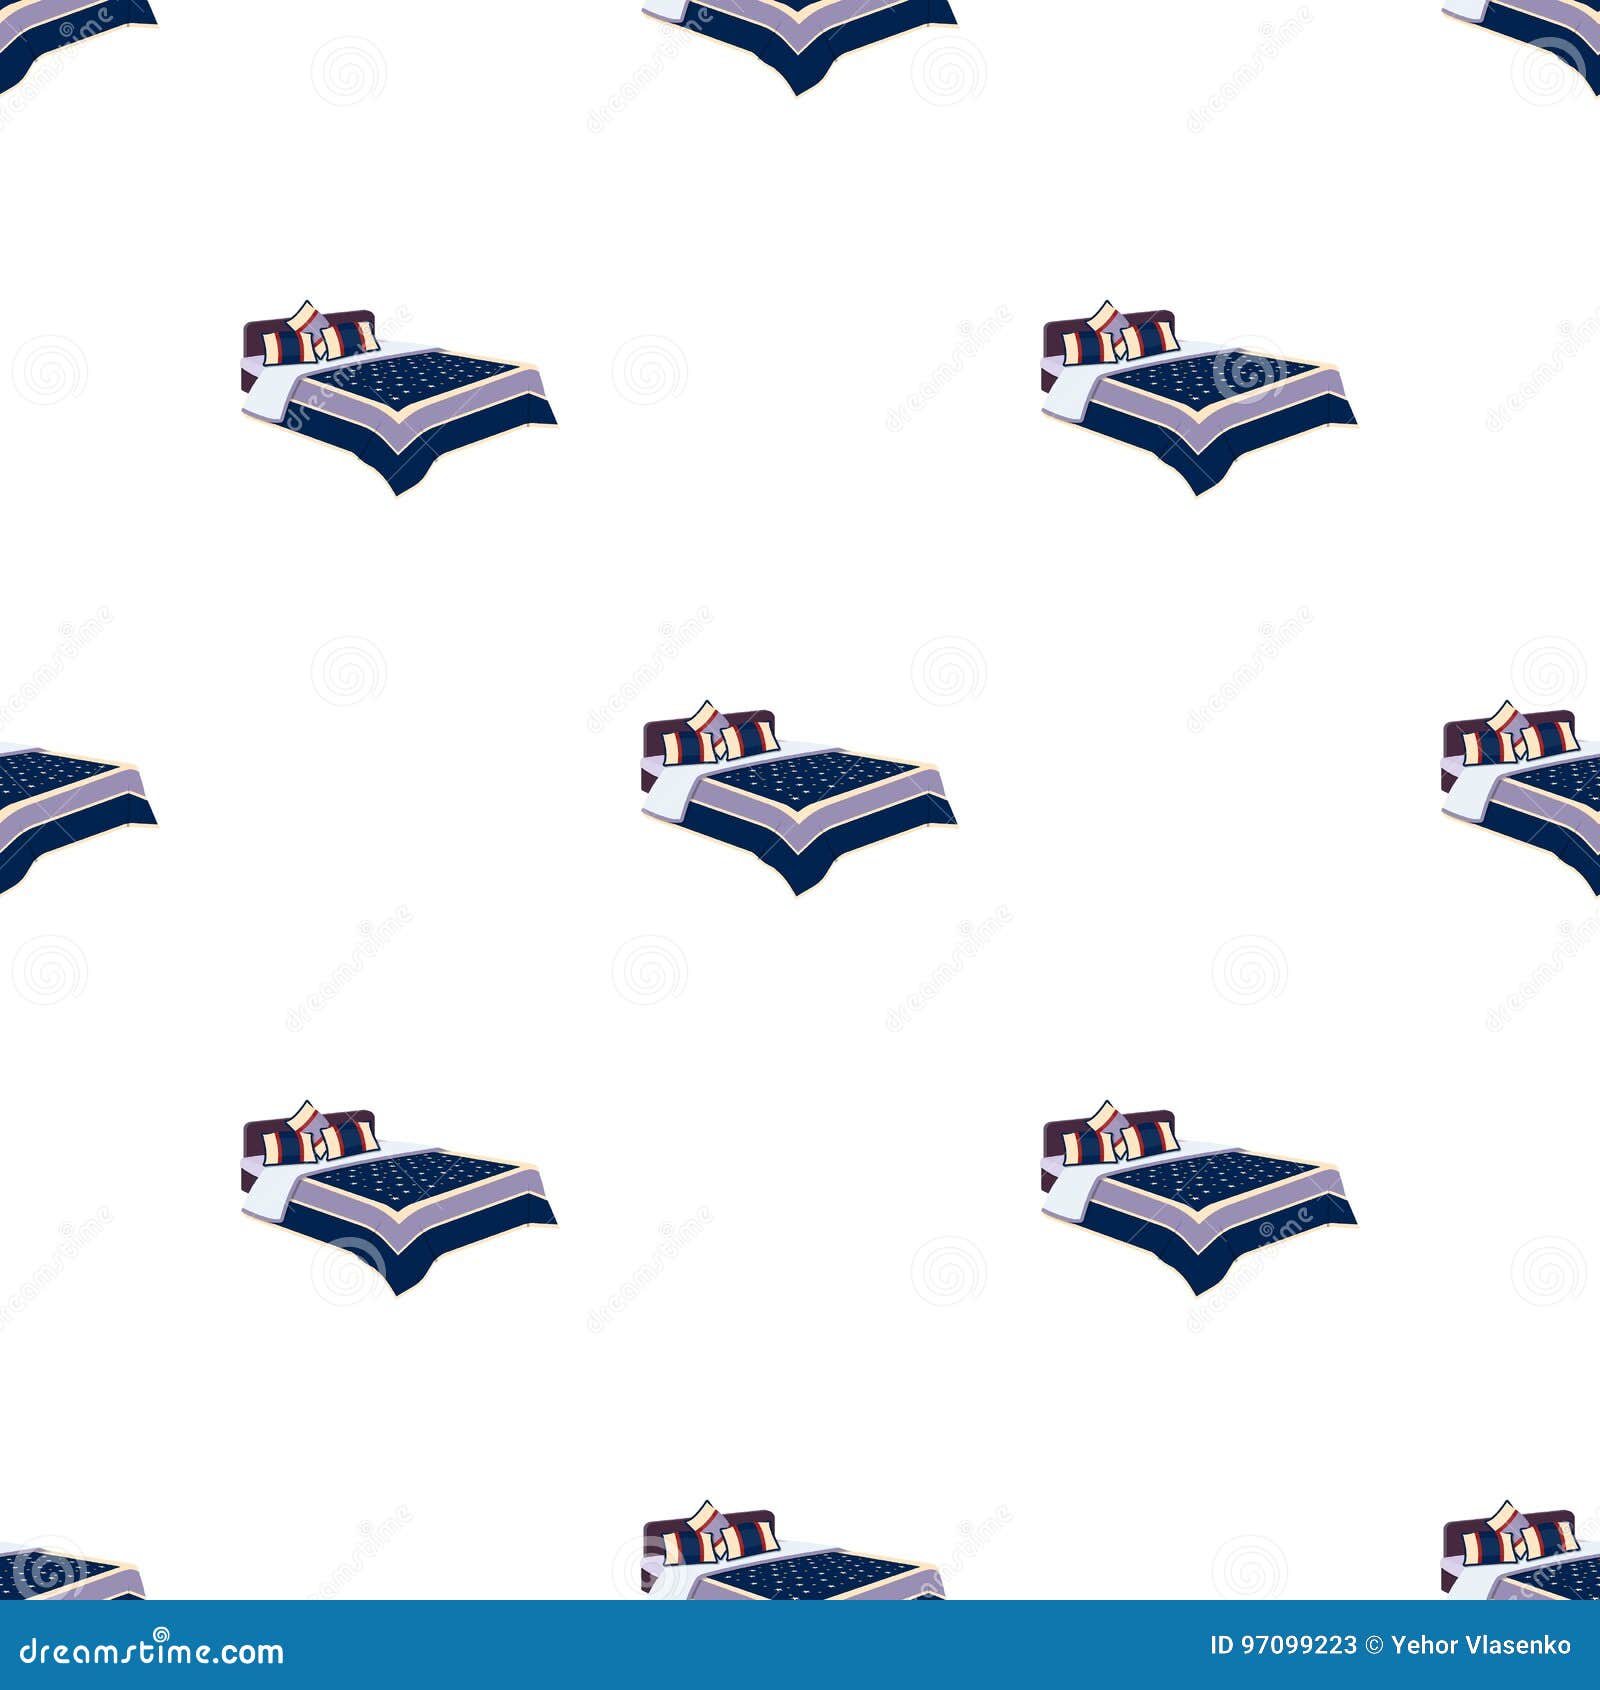 A Bed With A Back Pillows And A Coverlet Beds Single Icon In